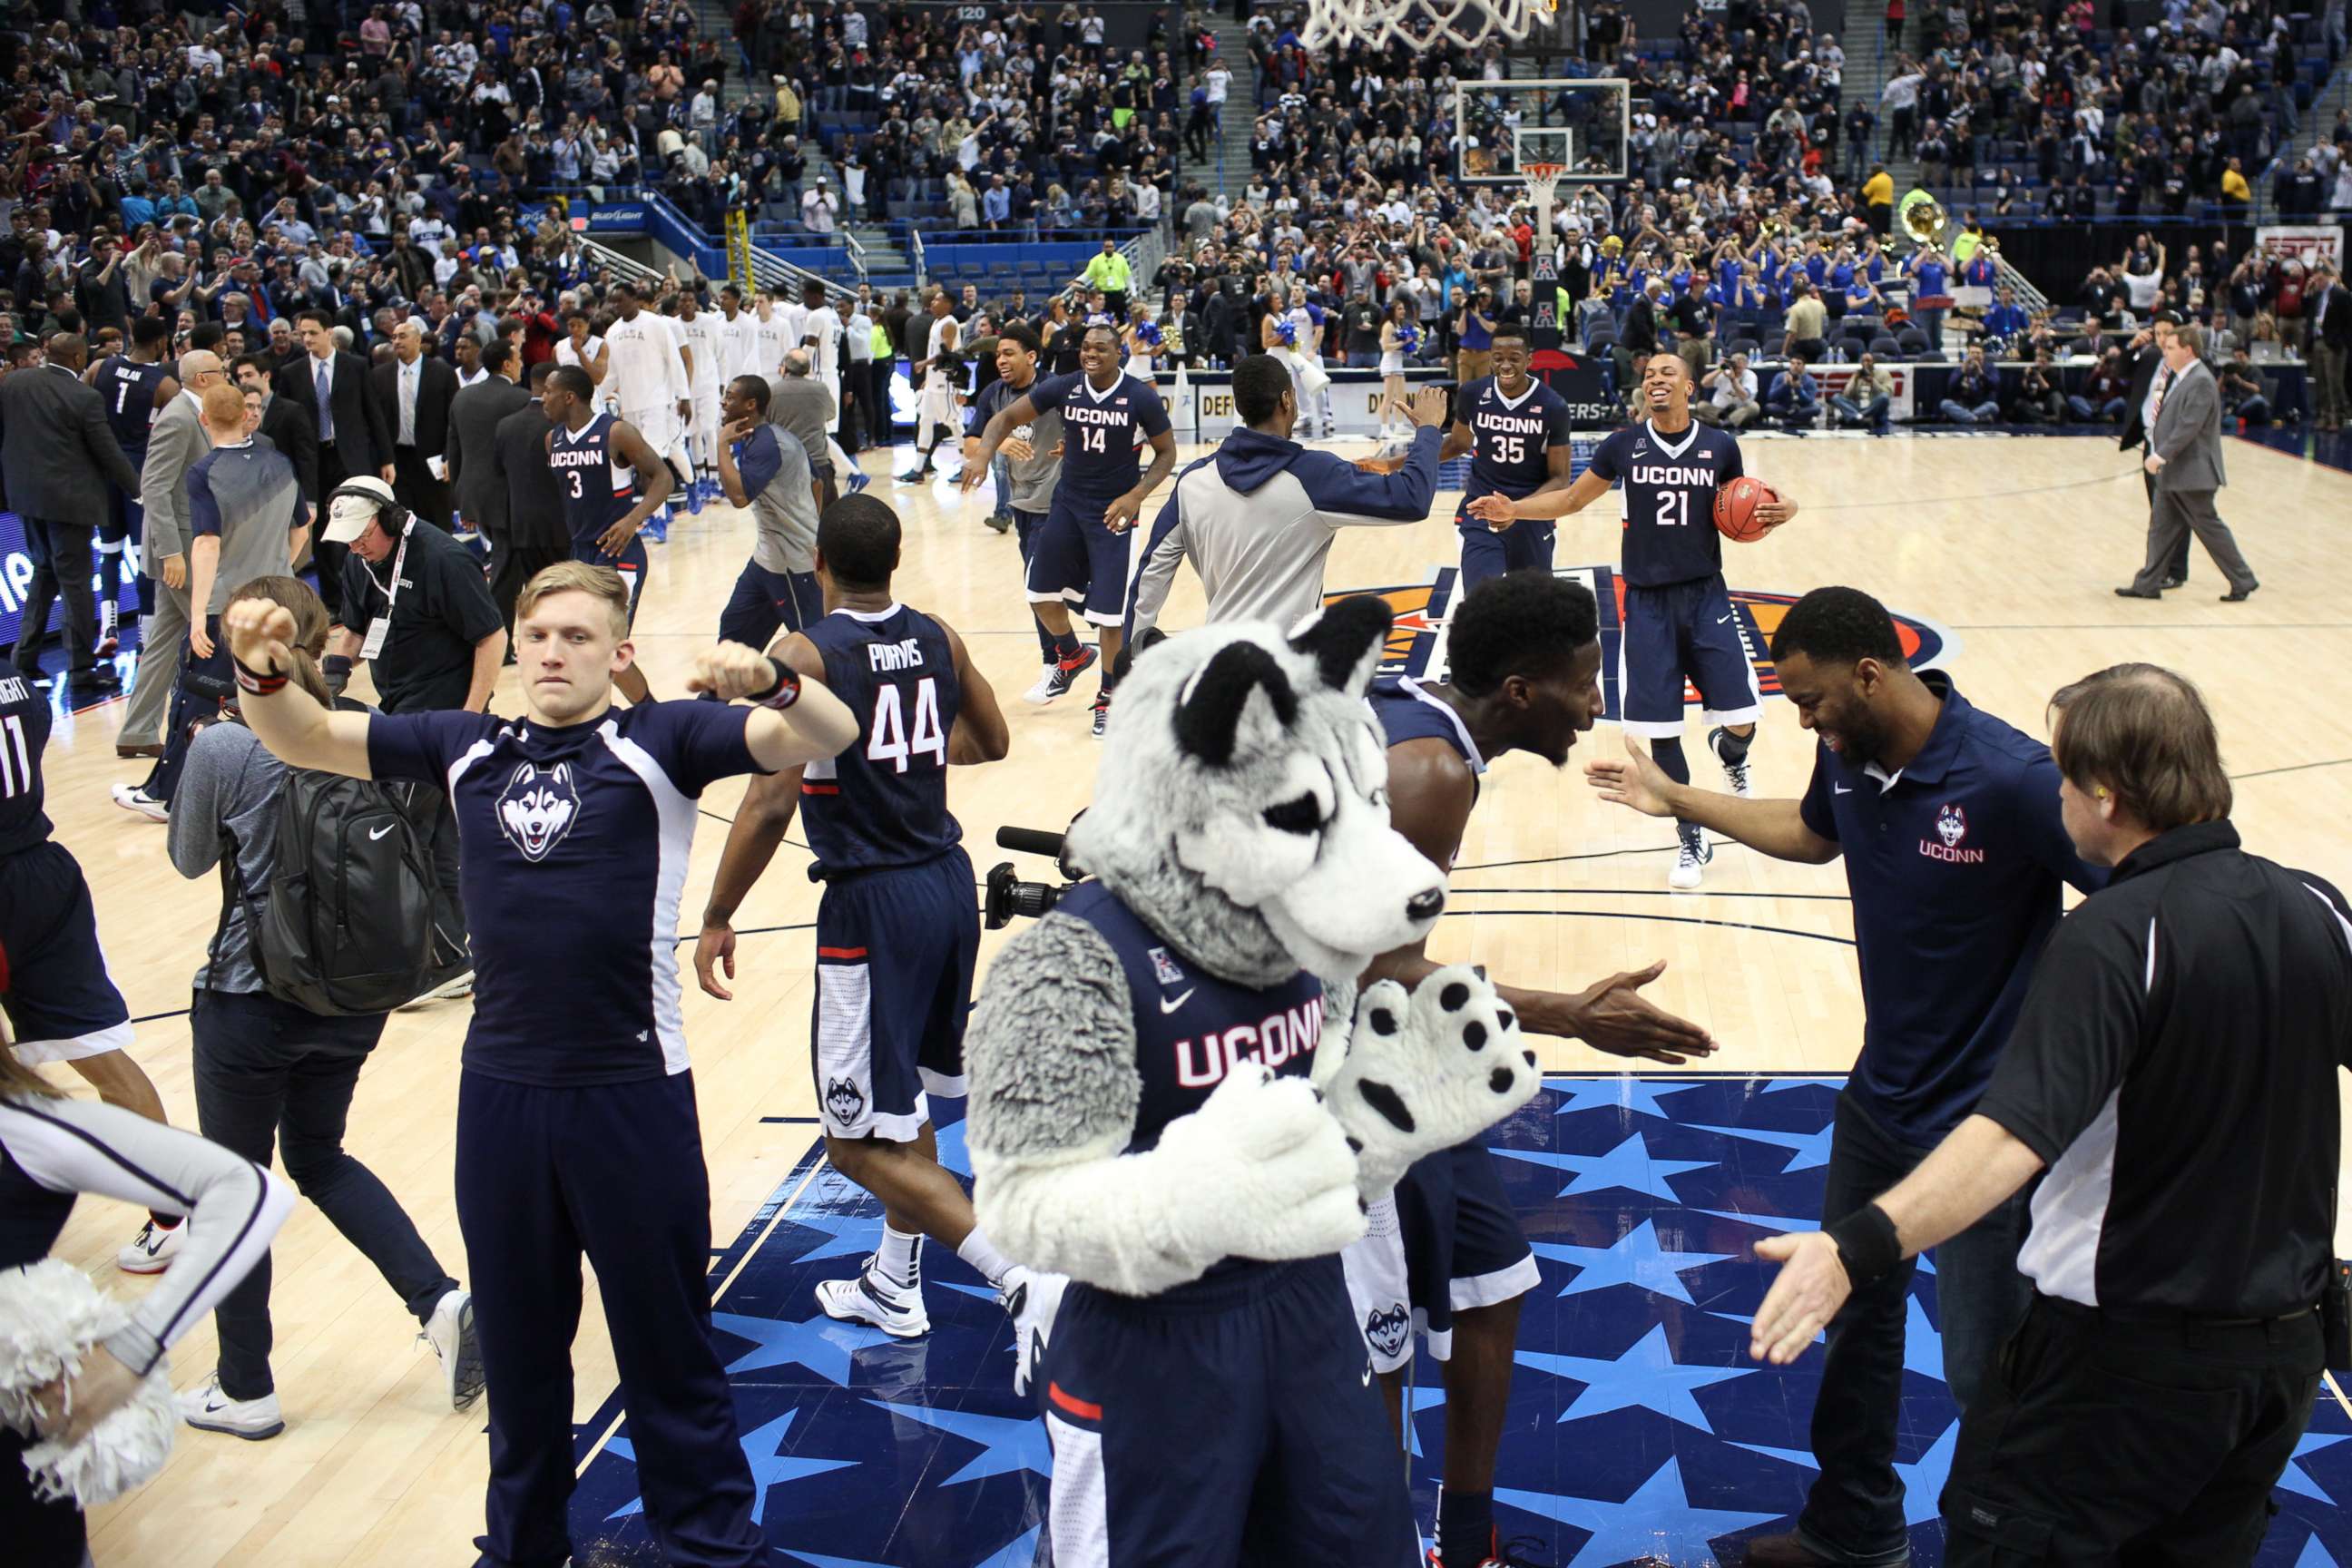 PHOTO: UConn celebrate victory at the end of the game during the UConn Huskies Vs Tulsa Semi Final game at the American Athletic Conference Men's College Basketball Championships 2015 at the XL Center, Hartford, Conn. March 14, 2015.